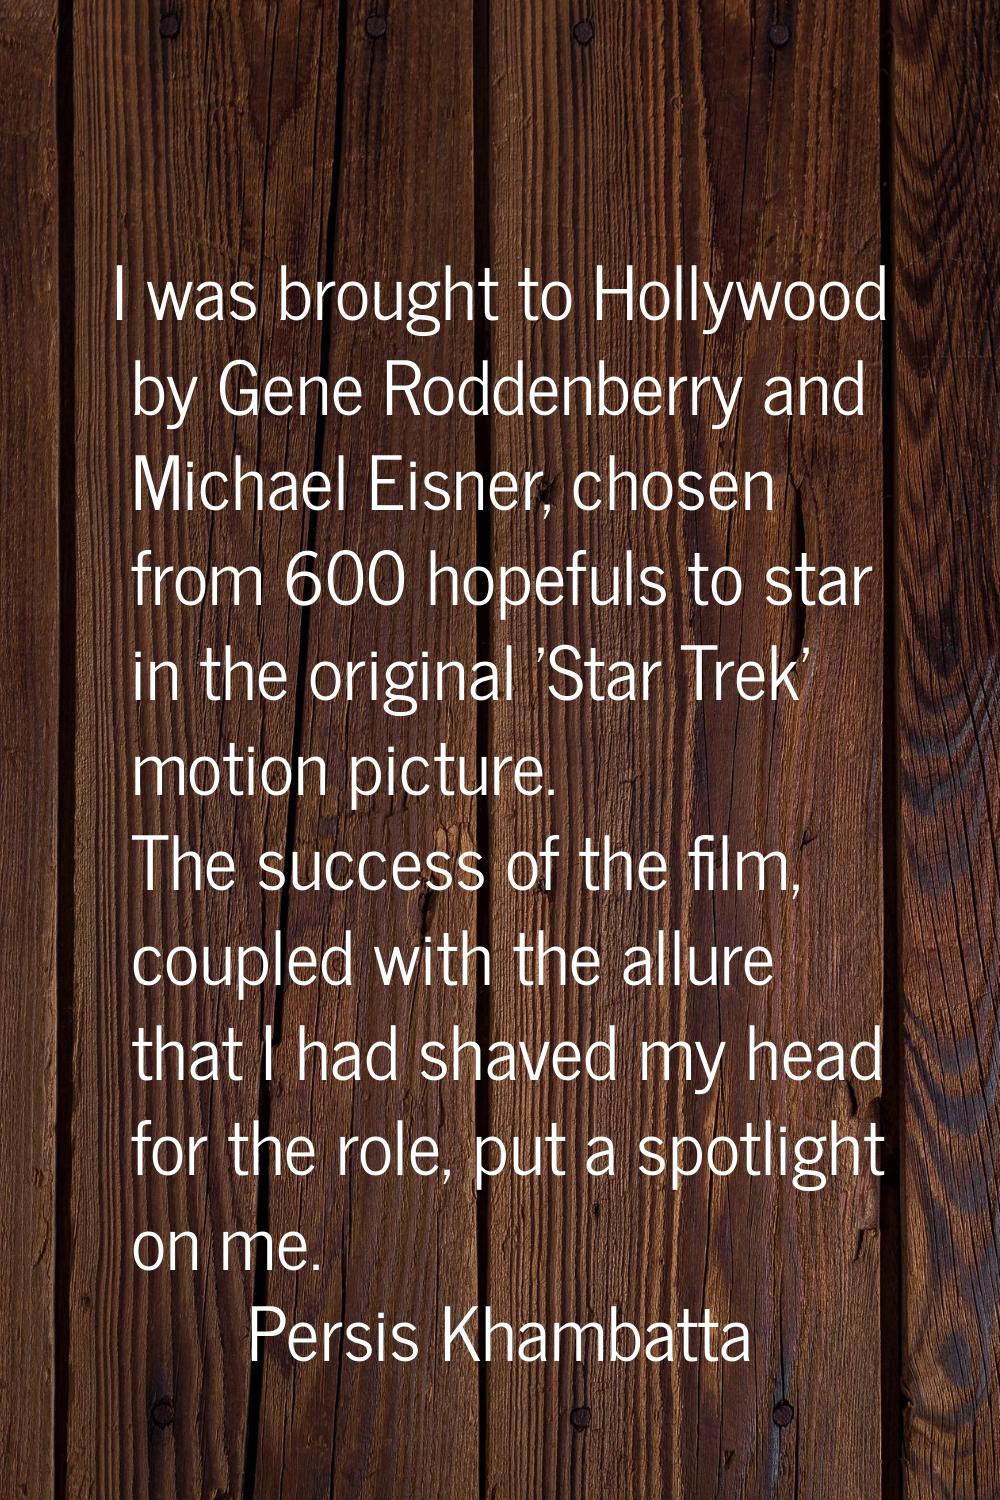 I was brought to Hollywood by Gene Roddenberry and Michael Eisner, chosen from 600 hopefuls to star